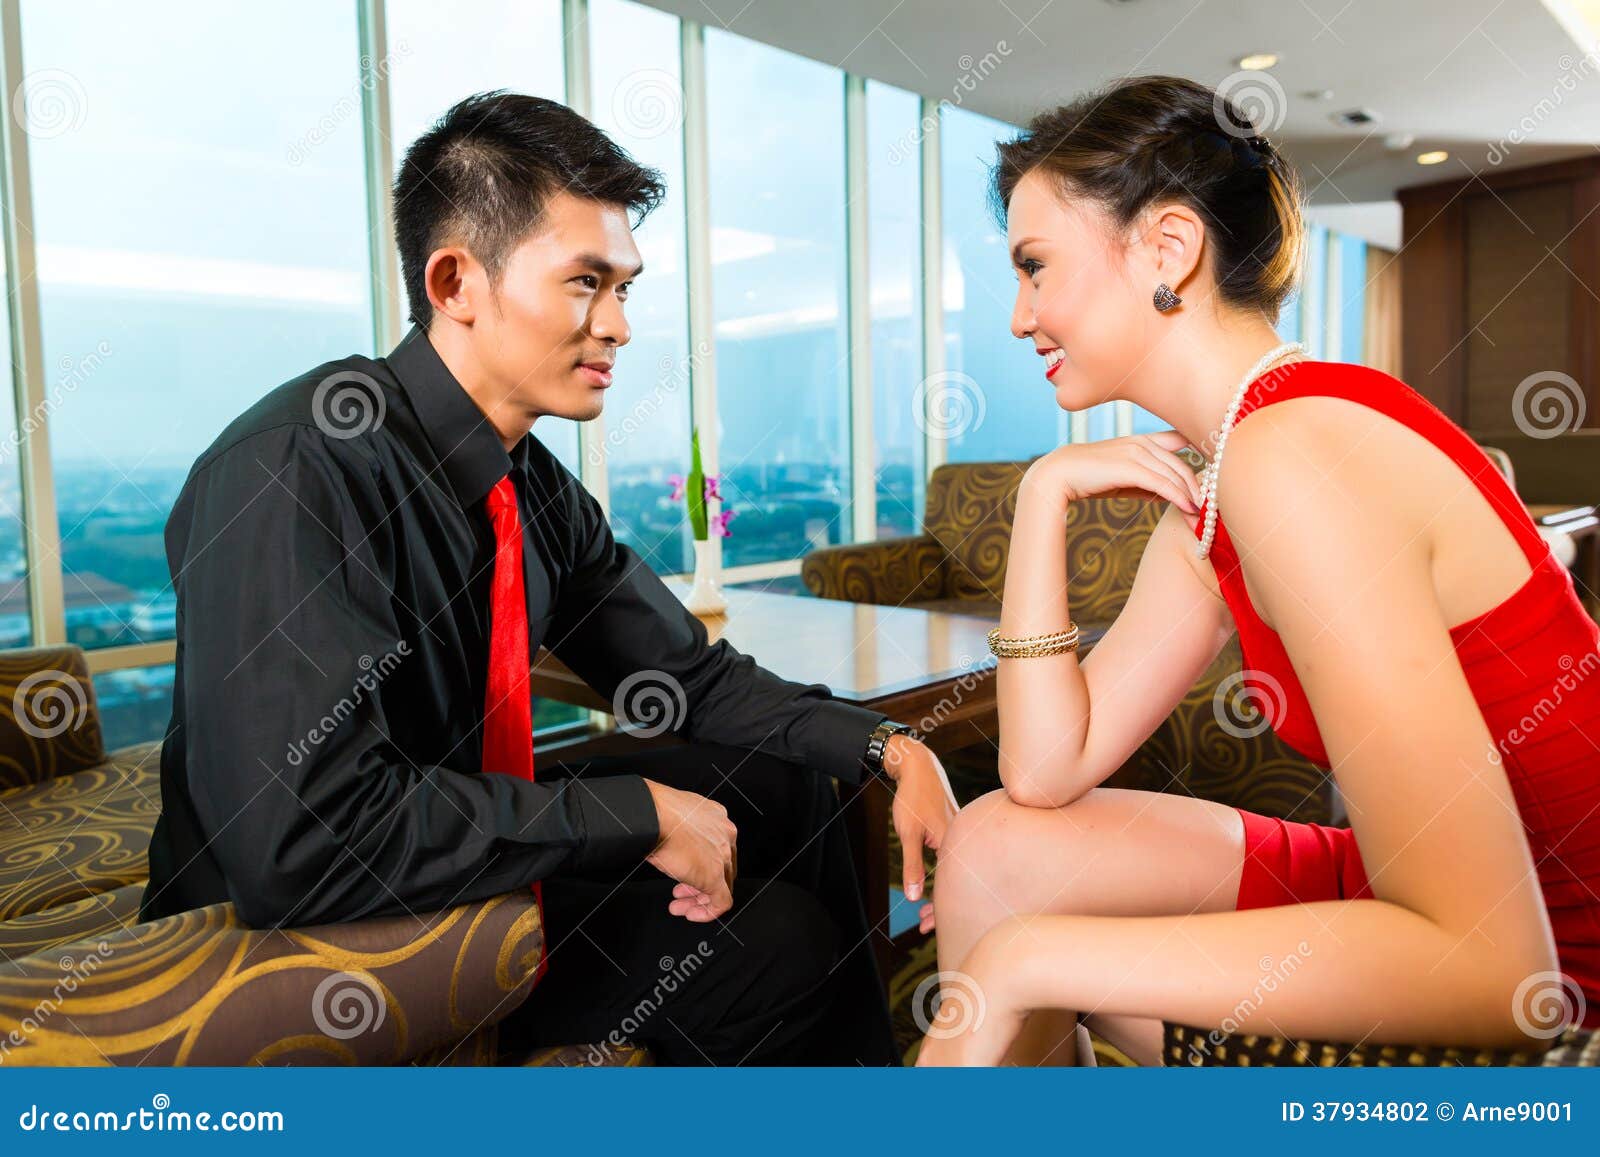 Chinese Couple Flirting in a Luxury Sky Hotel Bar Stock Photo pic